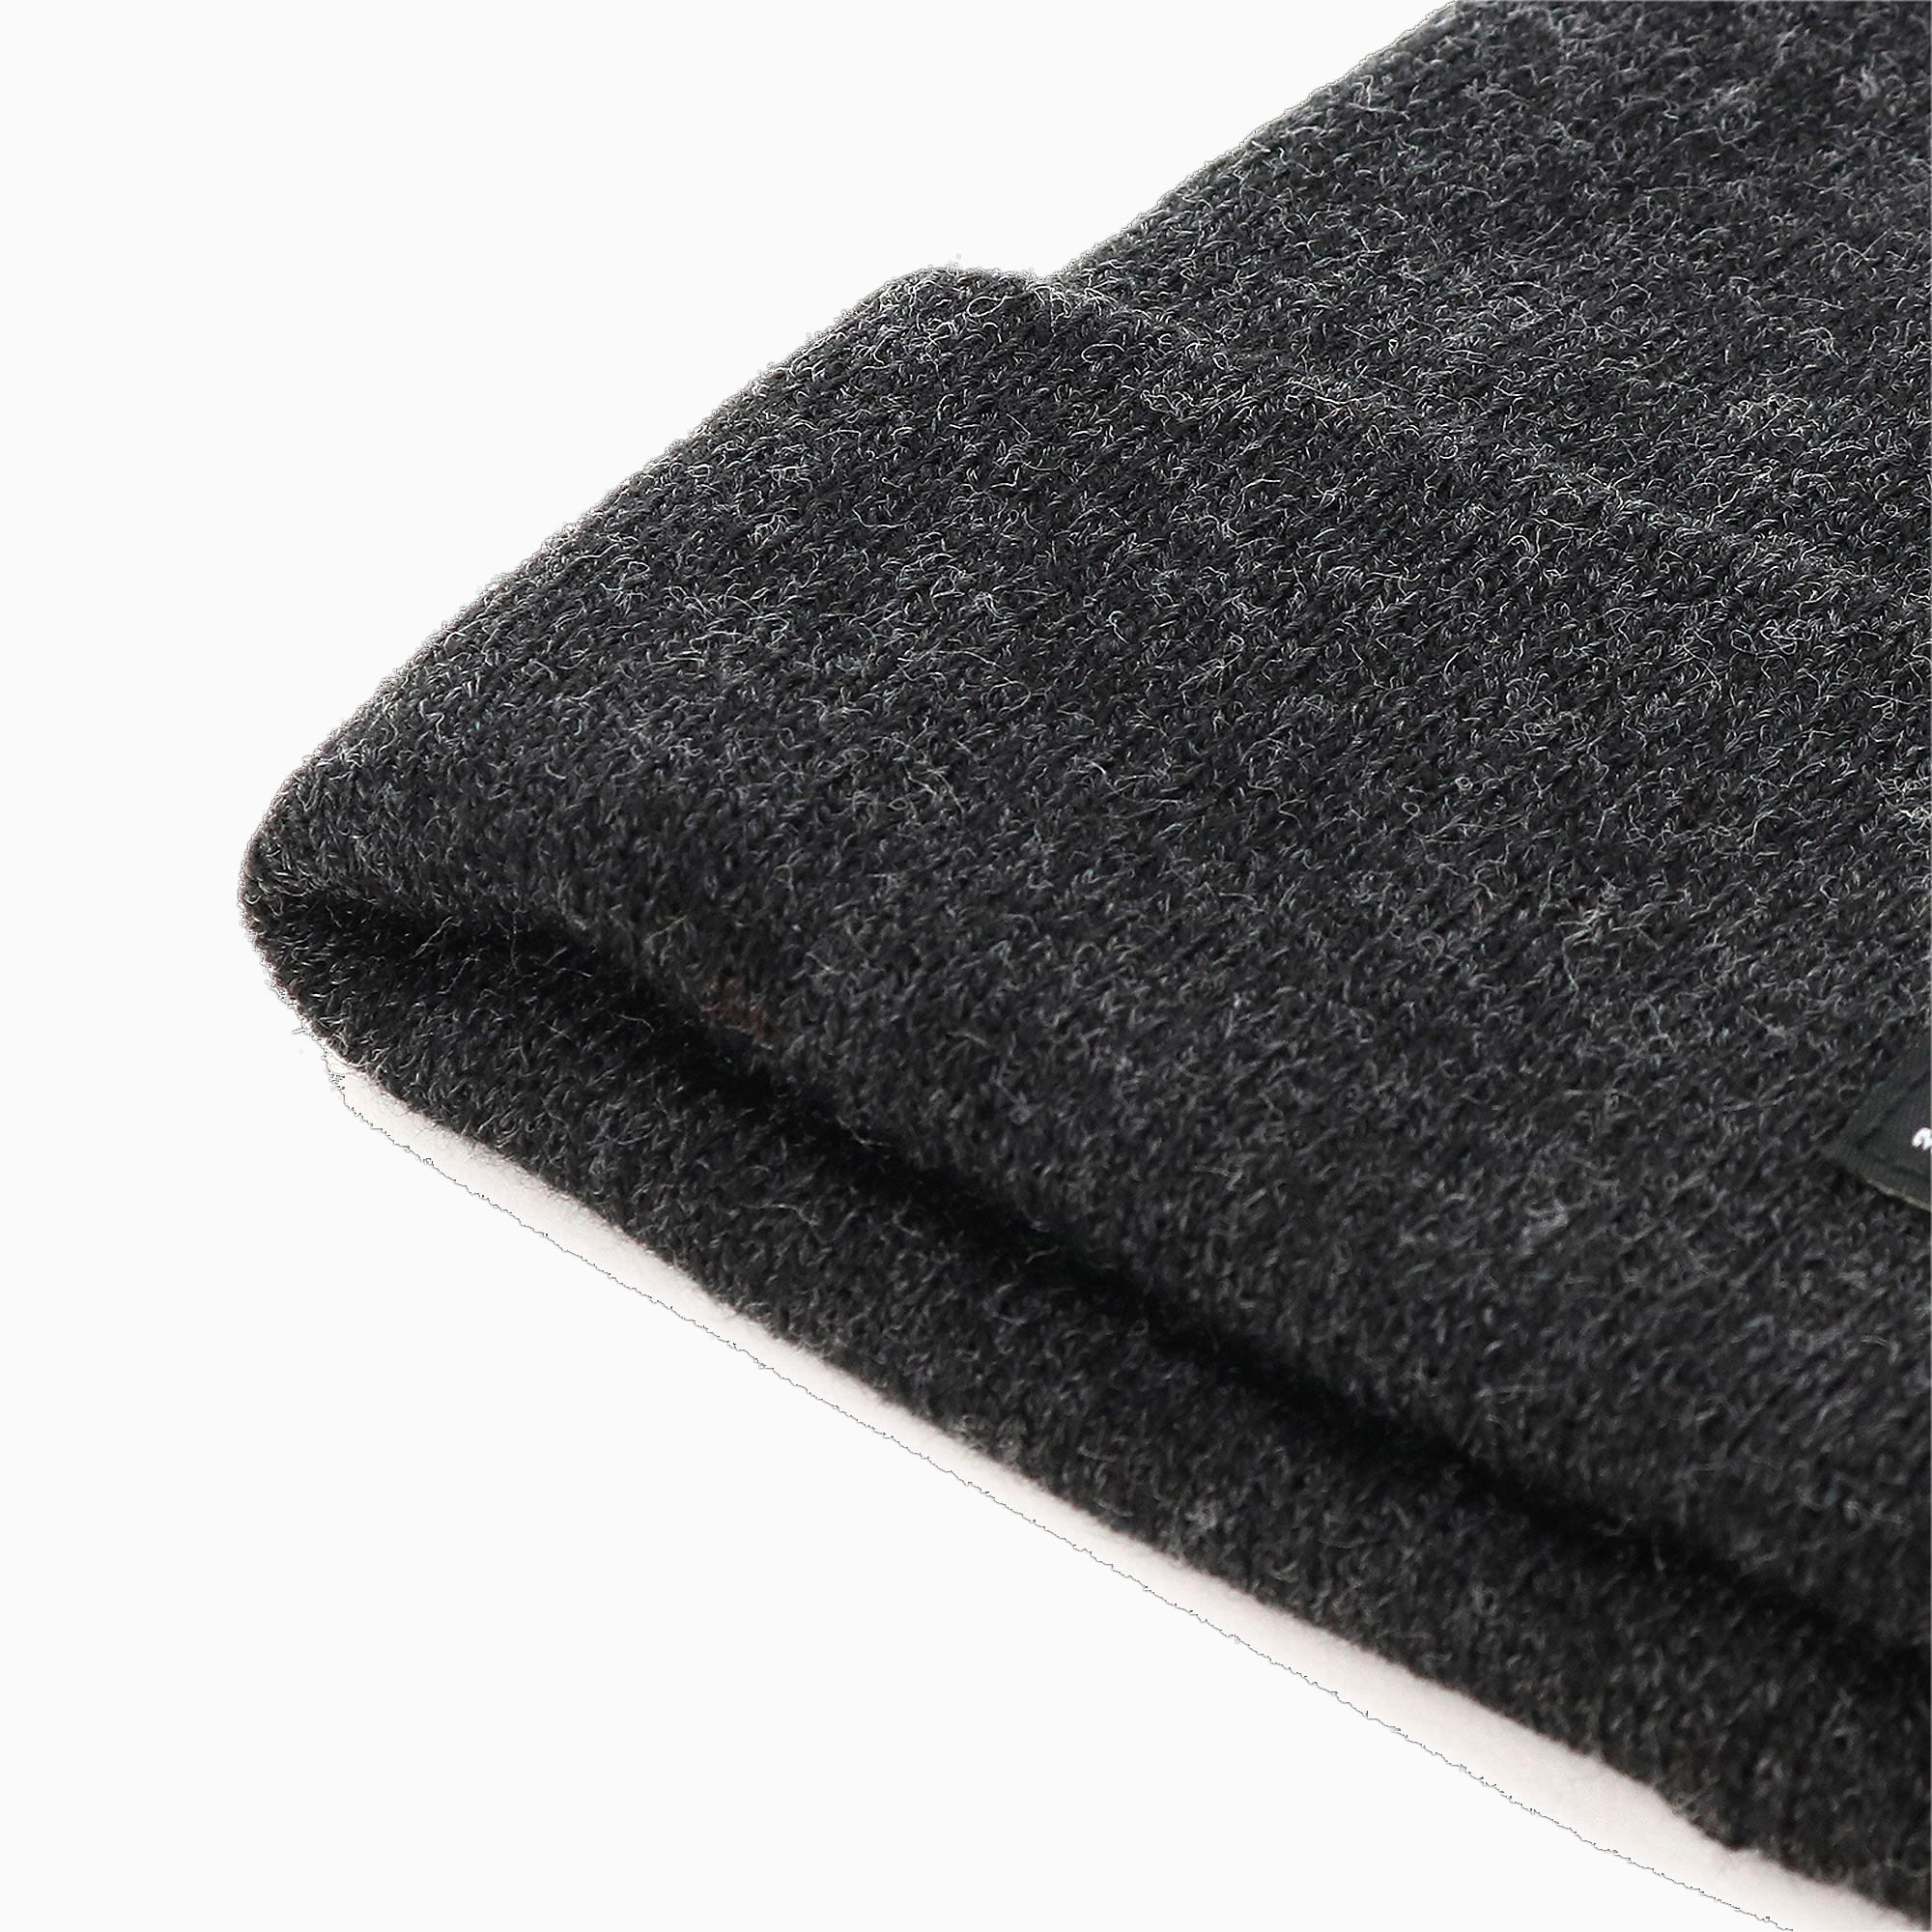 Beanie met labelpatch, model 'ARCHIVE'